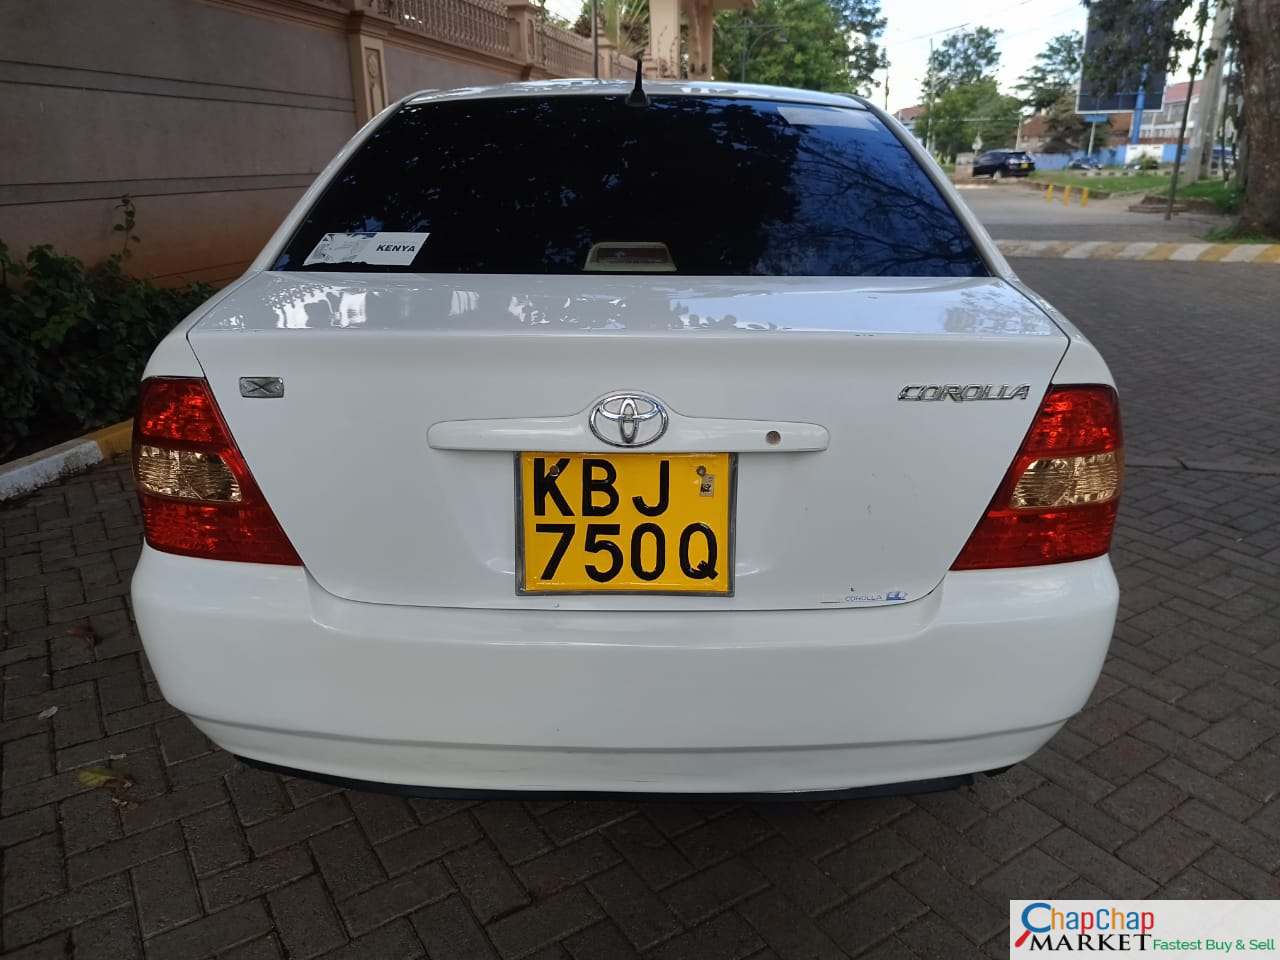 Toyota Corolla NZE QUICK SALE You Pay 35% Deposit Trade in OK Wow